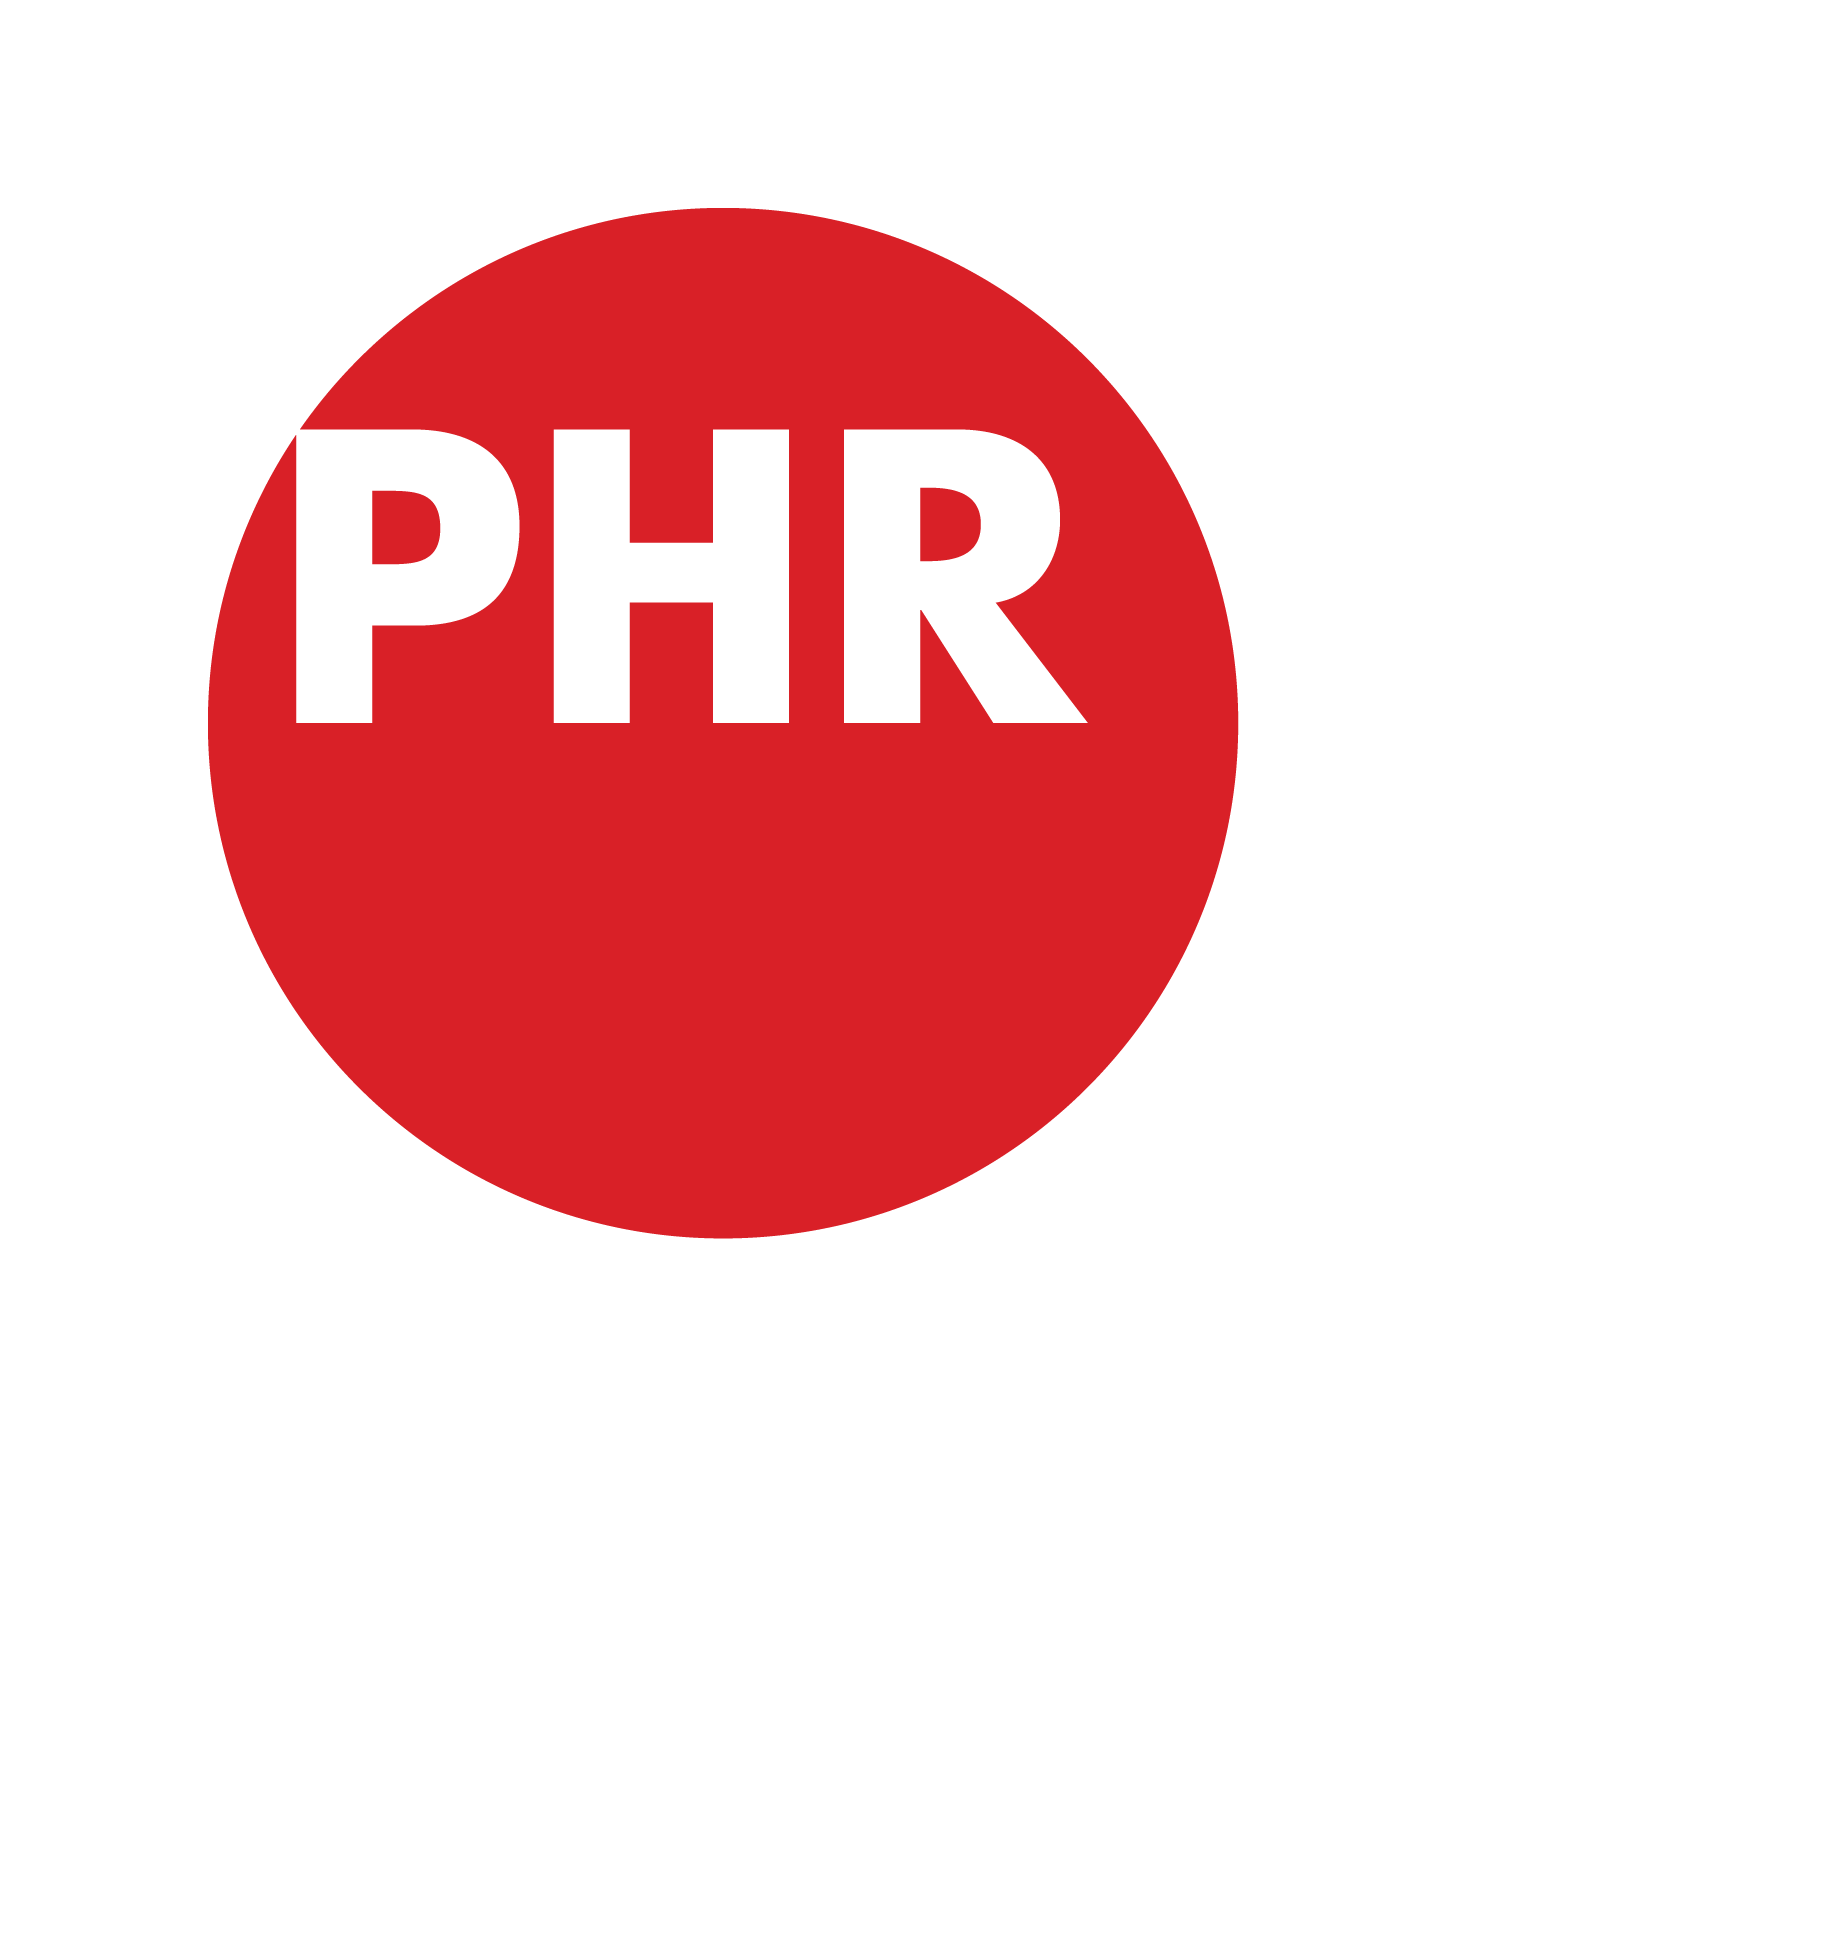 Physicians for Human Rights 